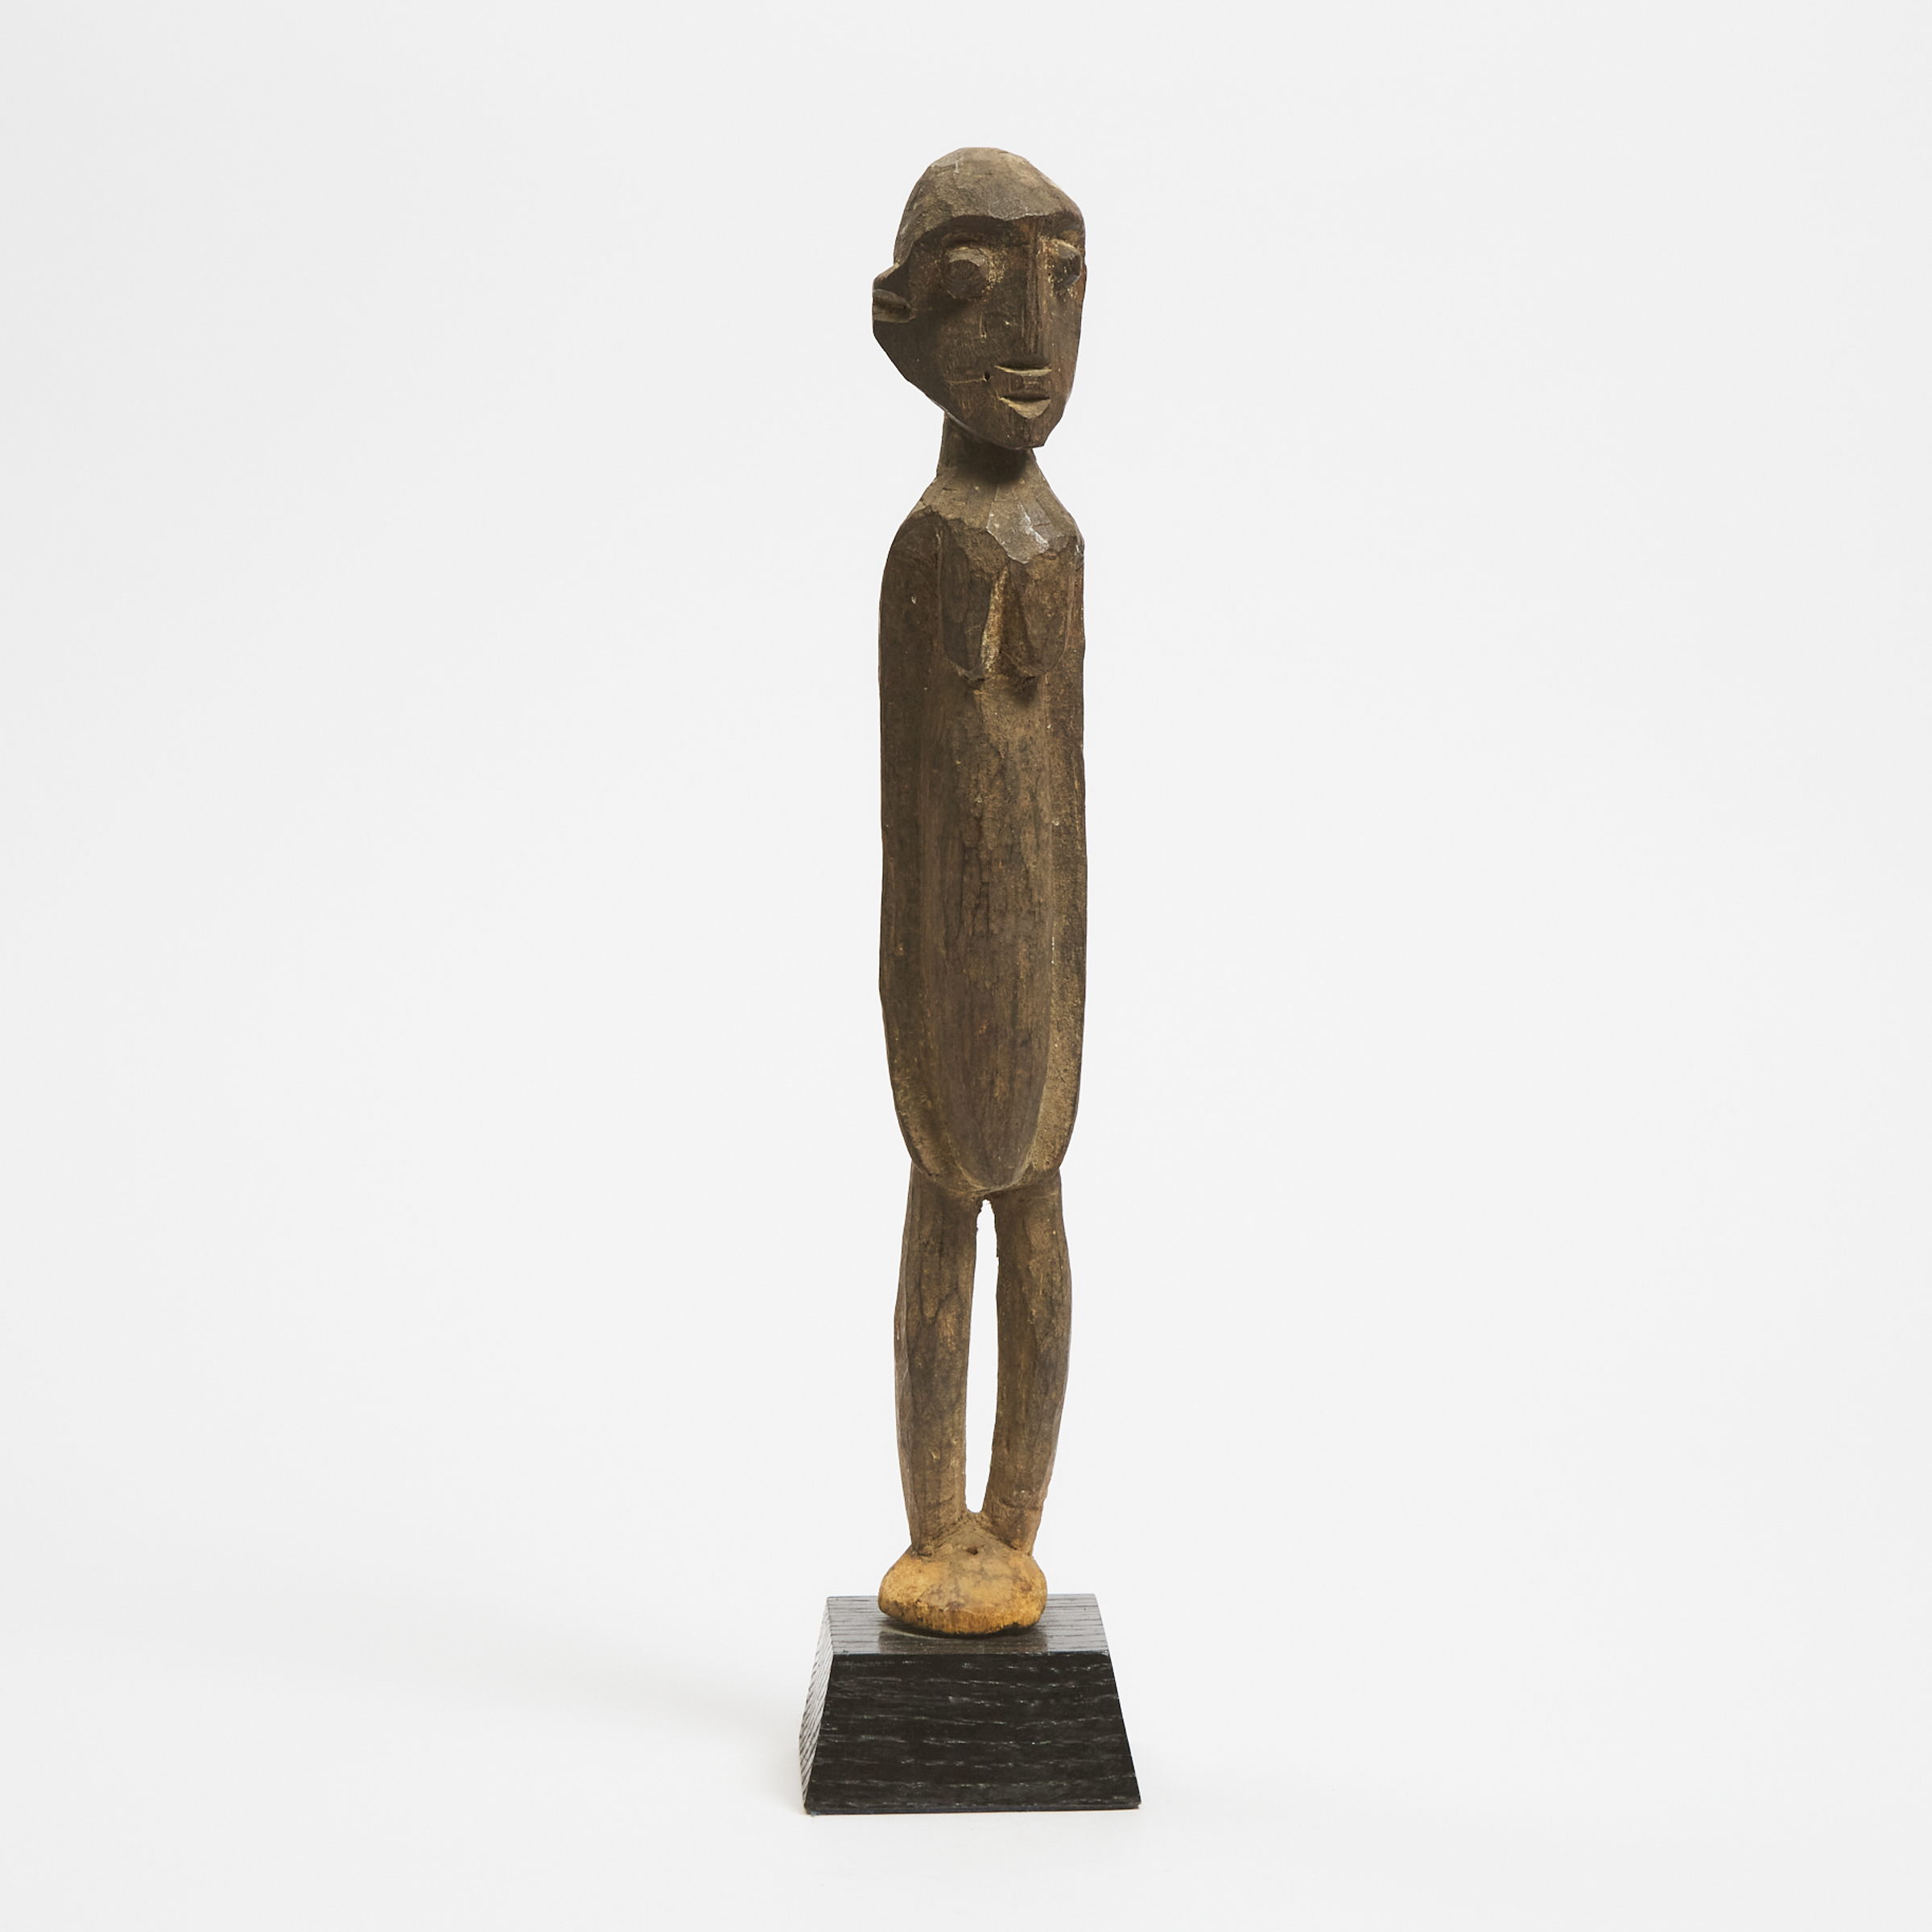 Unidentified African Carved Wood Figure, 20th century